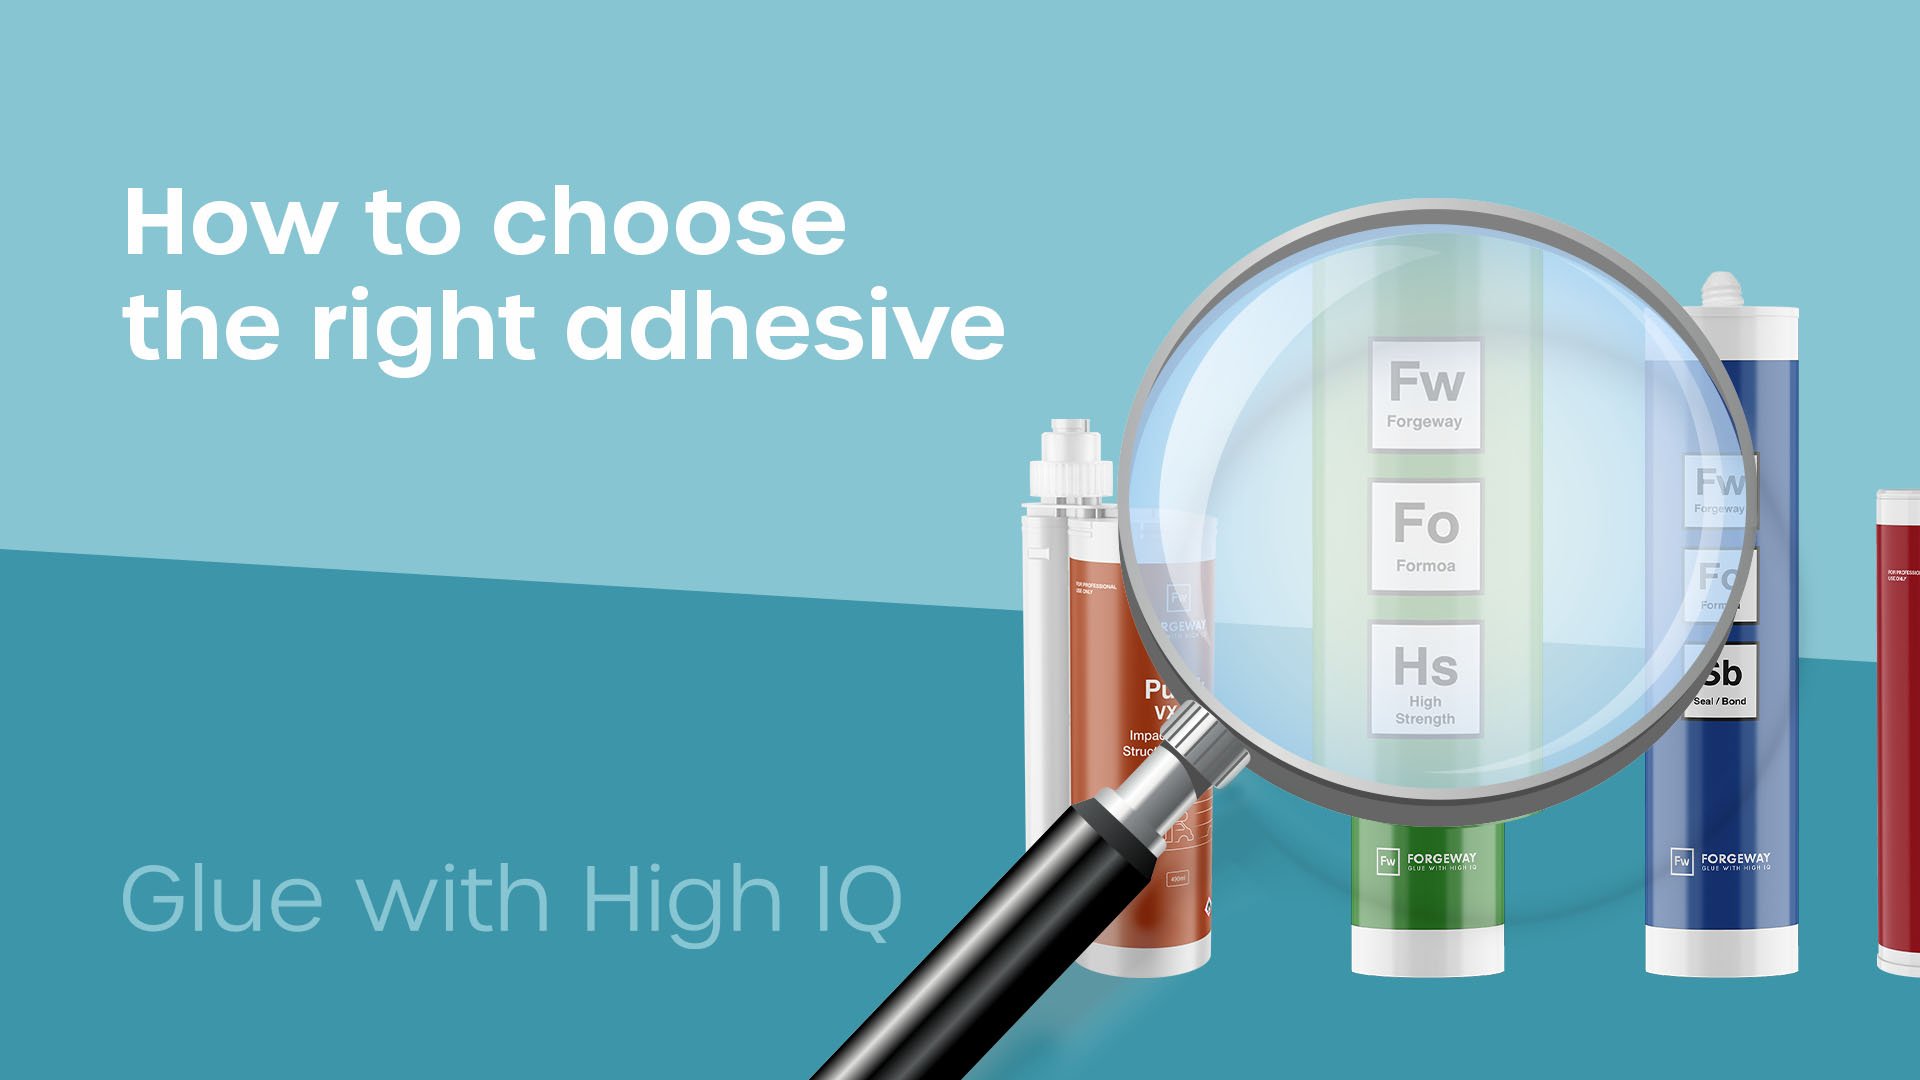 How to choose the right adhesive for your application